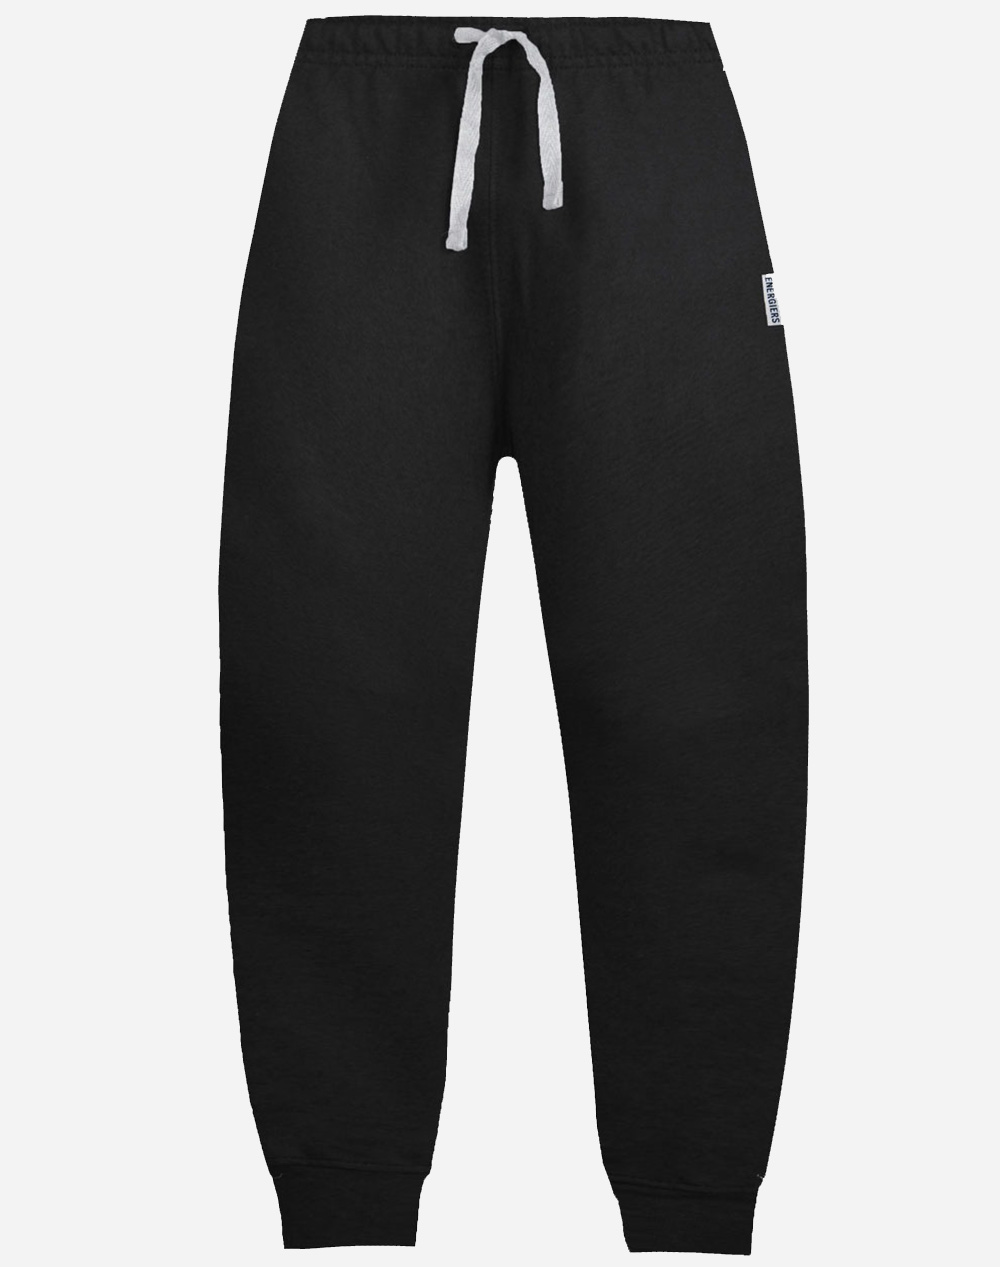 ENERGIERS TROUSERS BOYS ( Age from: 6 - 16 years)